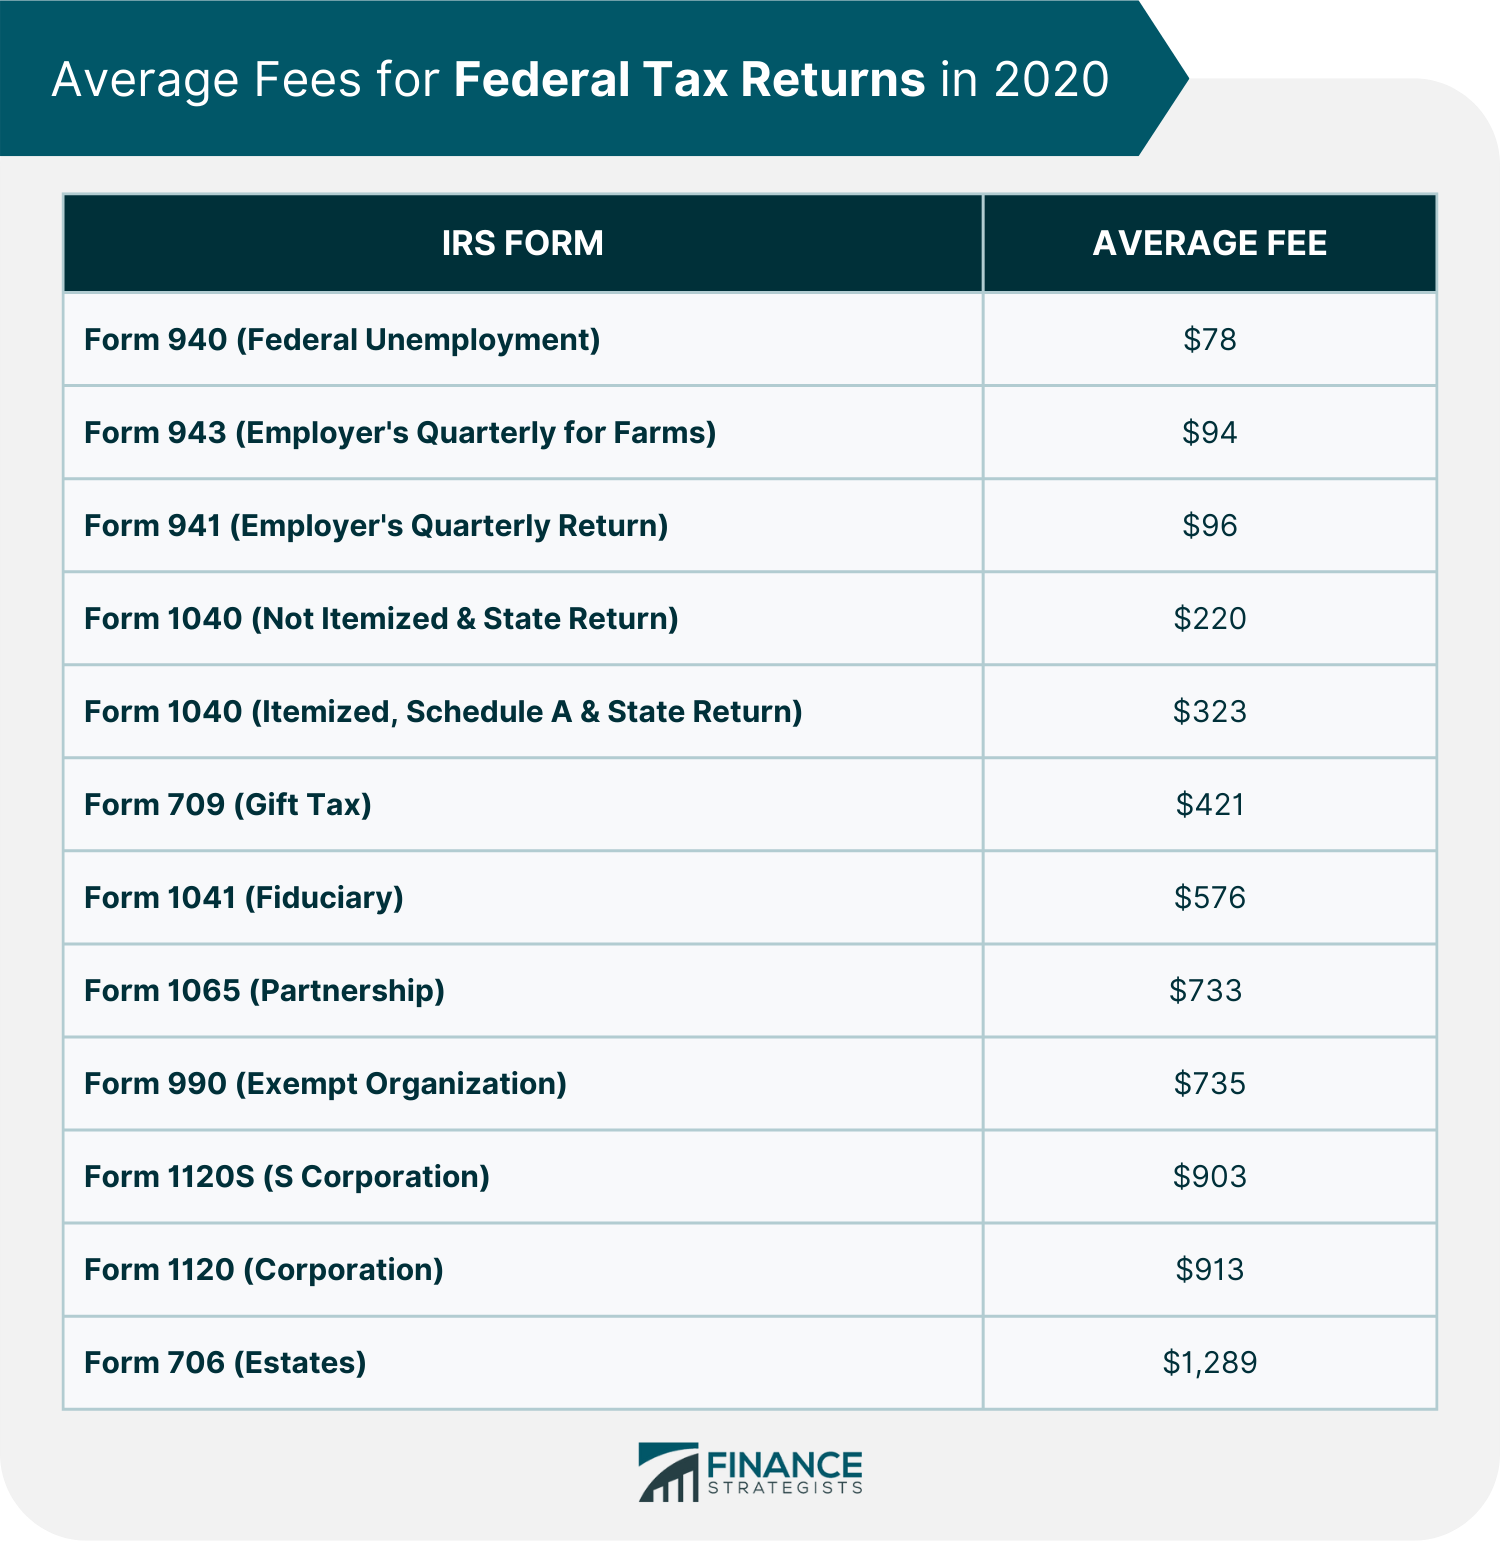 Average_Fees_for_Federal_Tax_Returns_in_2020